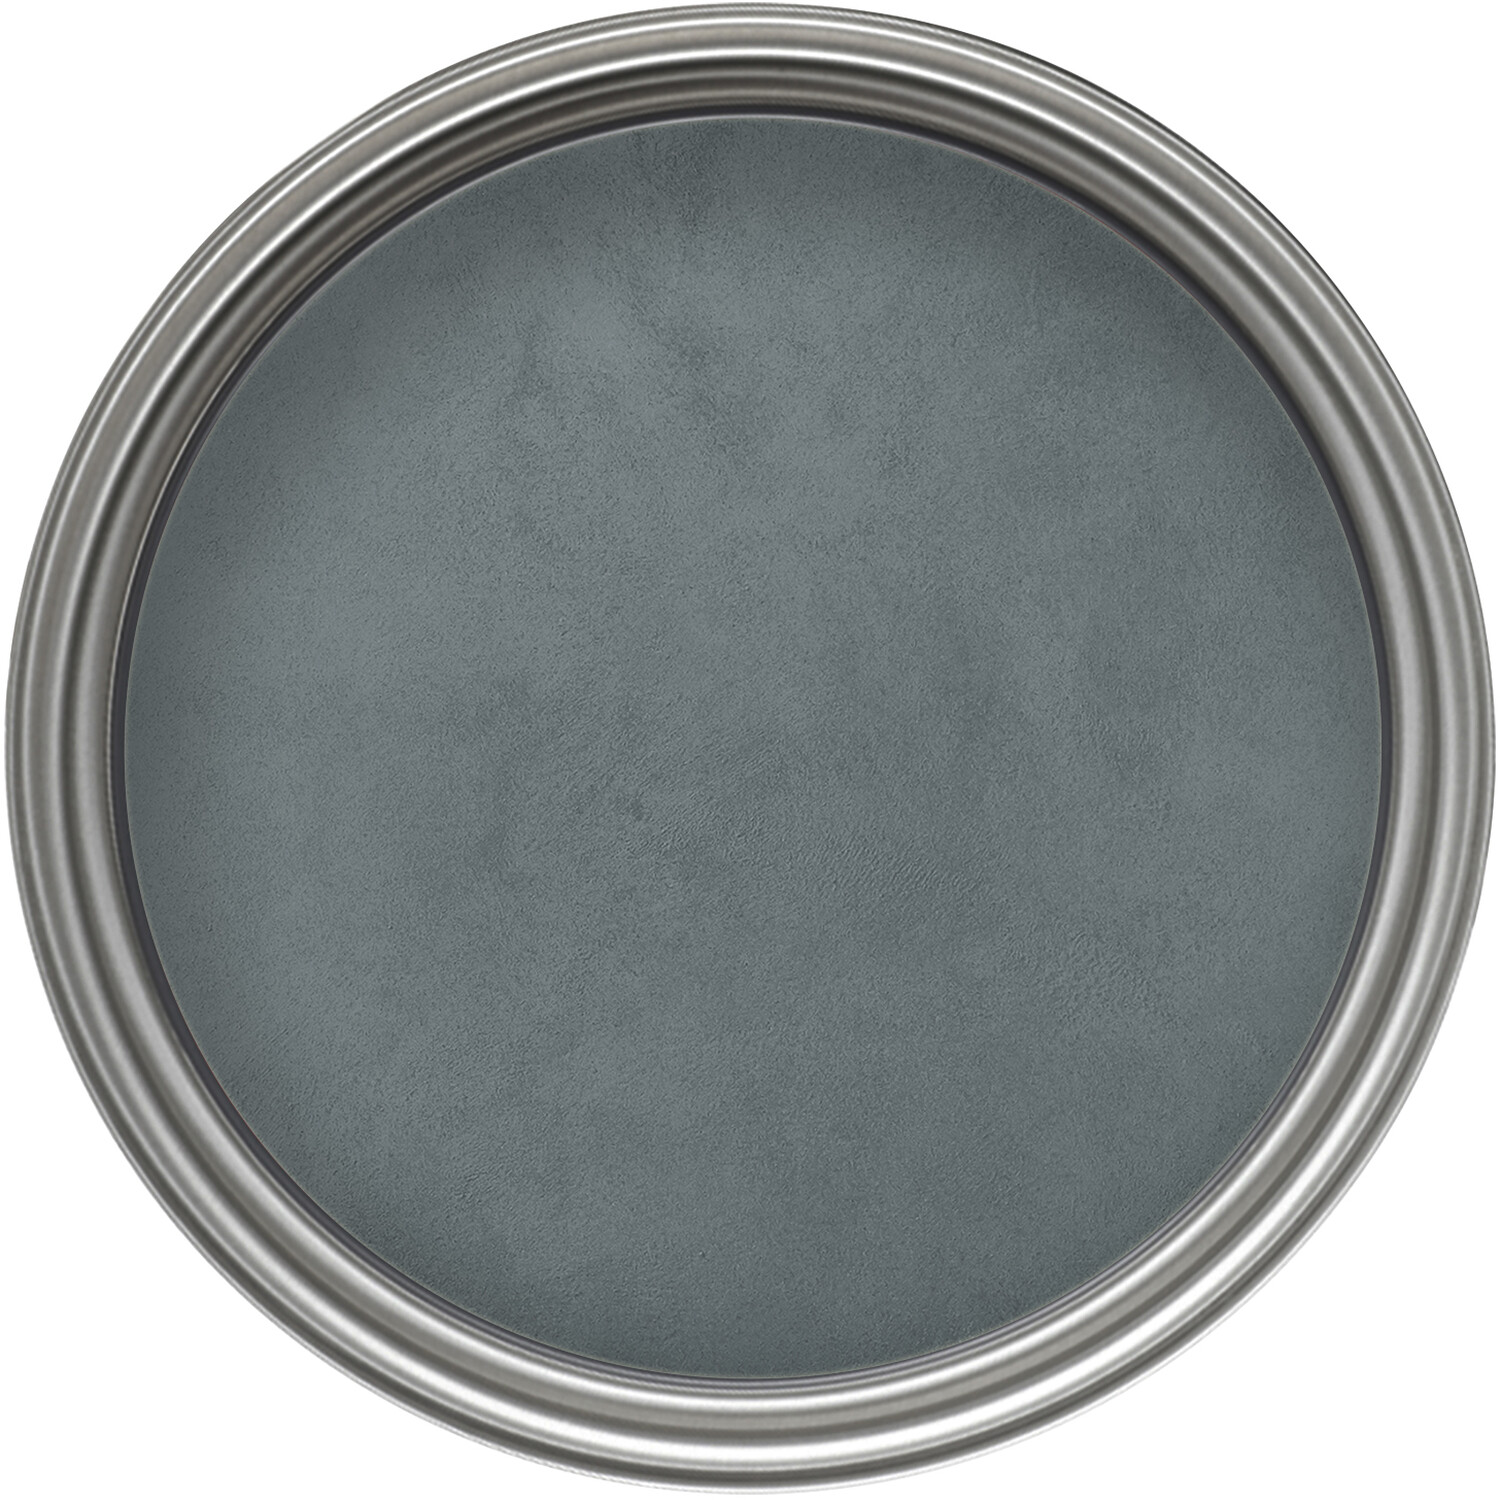 Crown Crafted Walls Dark Grey Suede Textured Finish Paint 2.5L Image 3